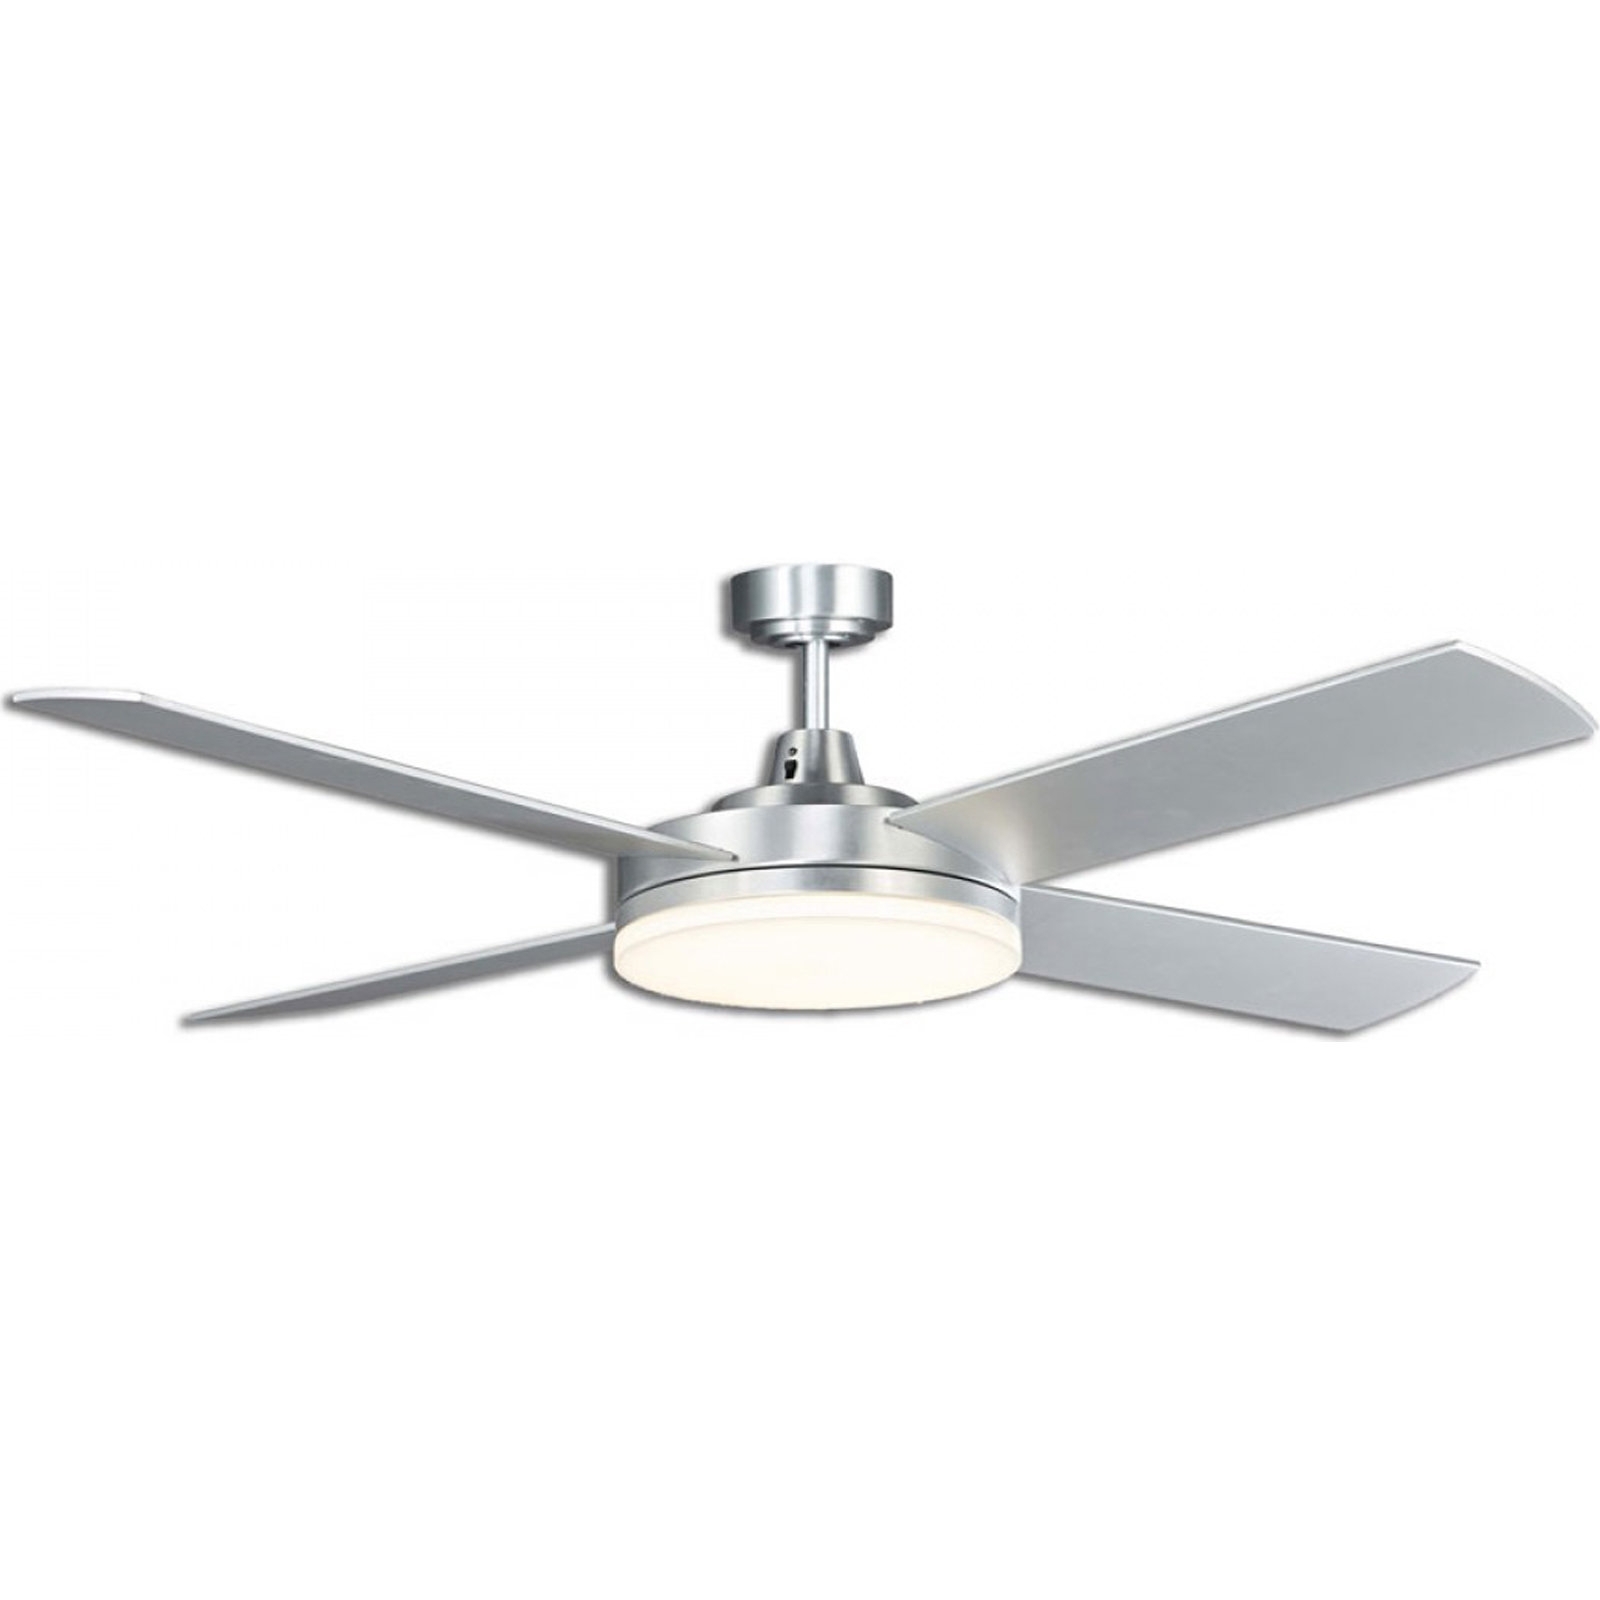 Ceiling Fans With Lights Low Profile